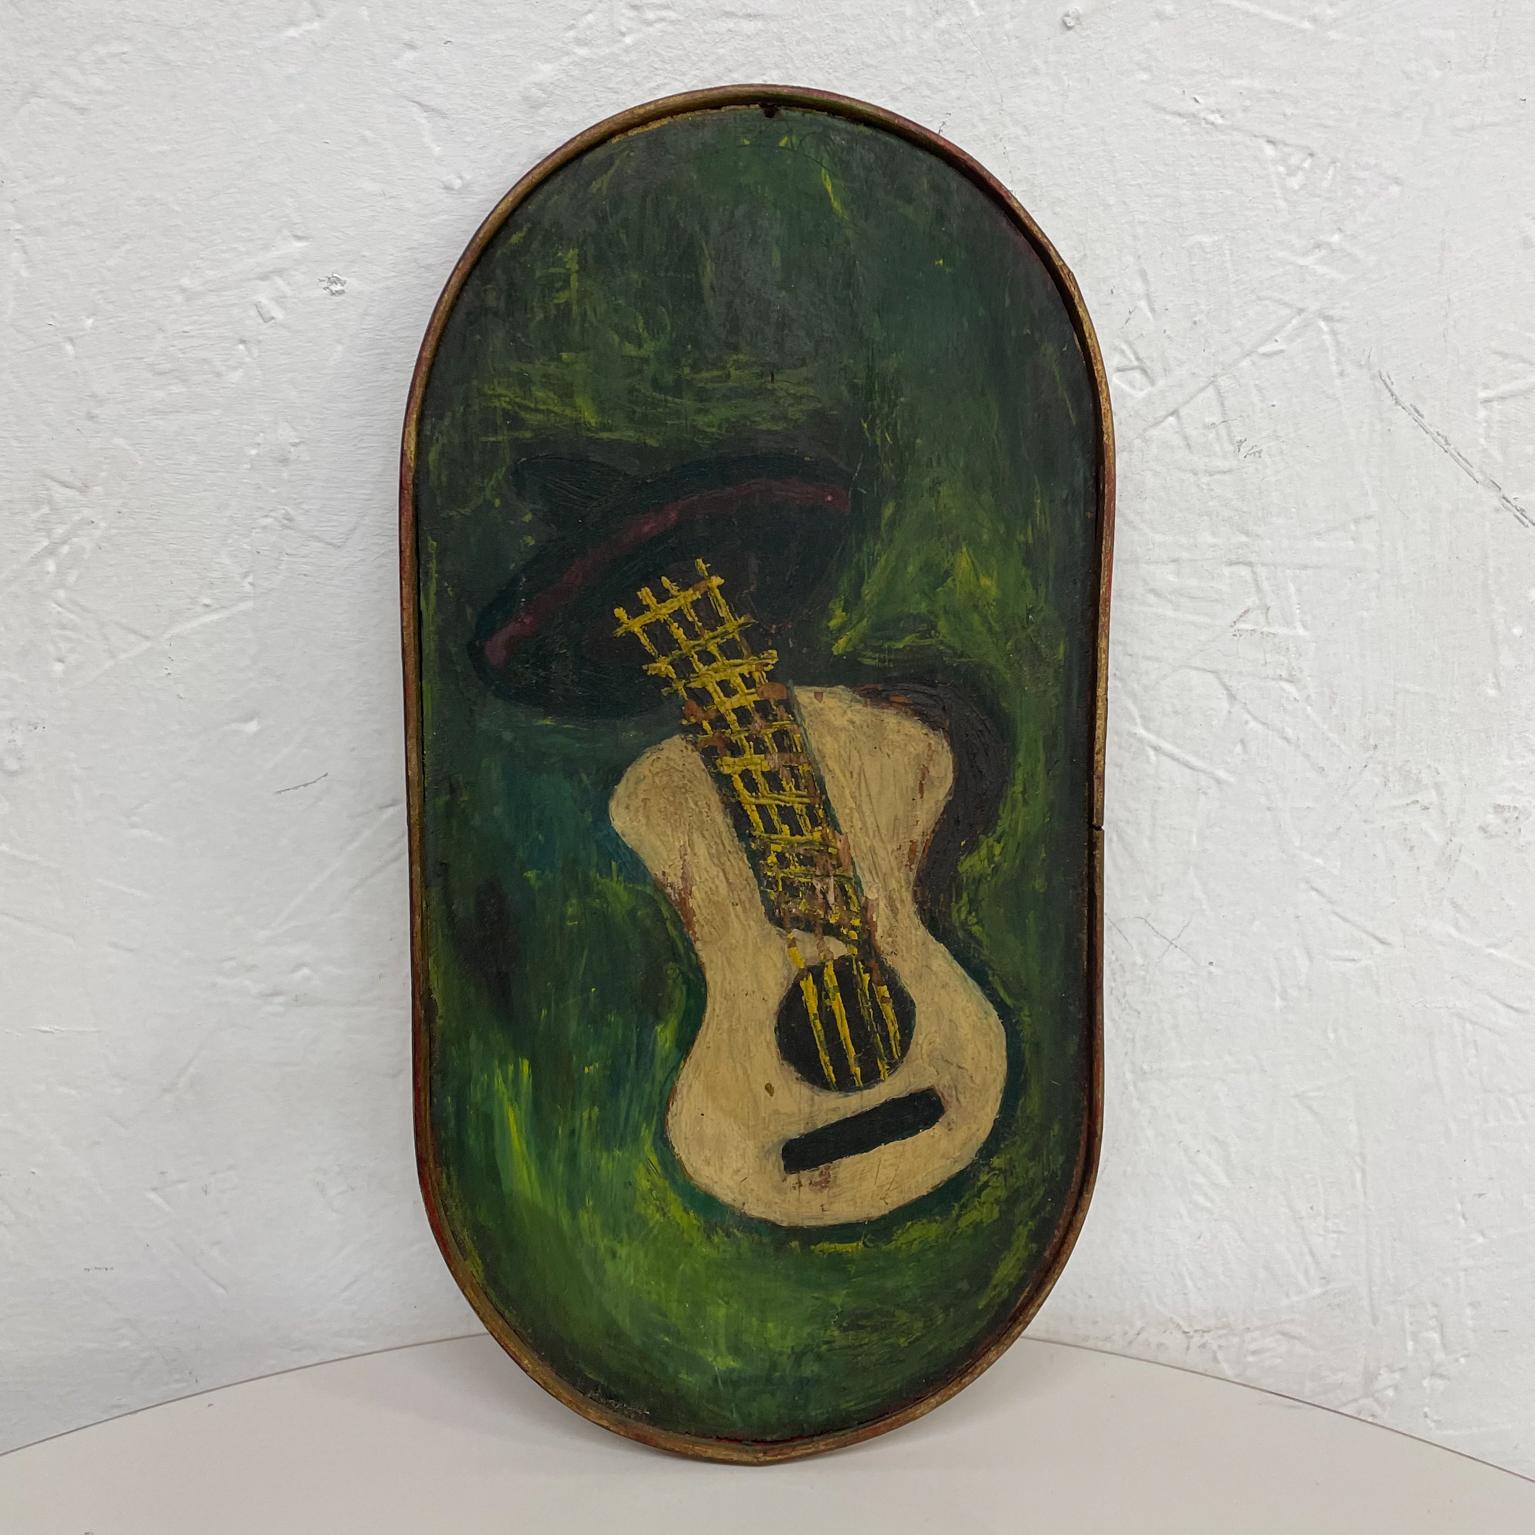 Painting.
Green Guitar Artwork painted on wood vintage wallPlaque 1970s
Measures: 12.13 x 6.13 x .38
No signature.
Preowned original vintage condition
Refer to images.